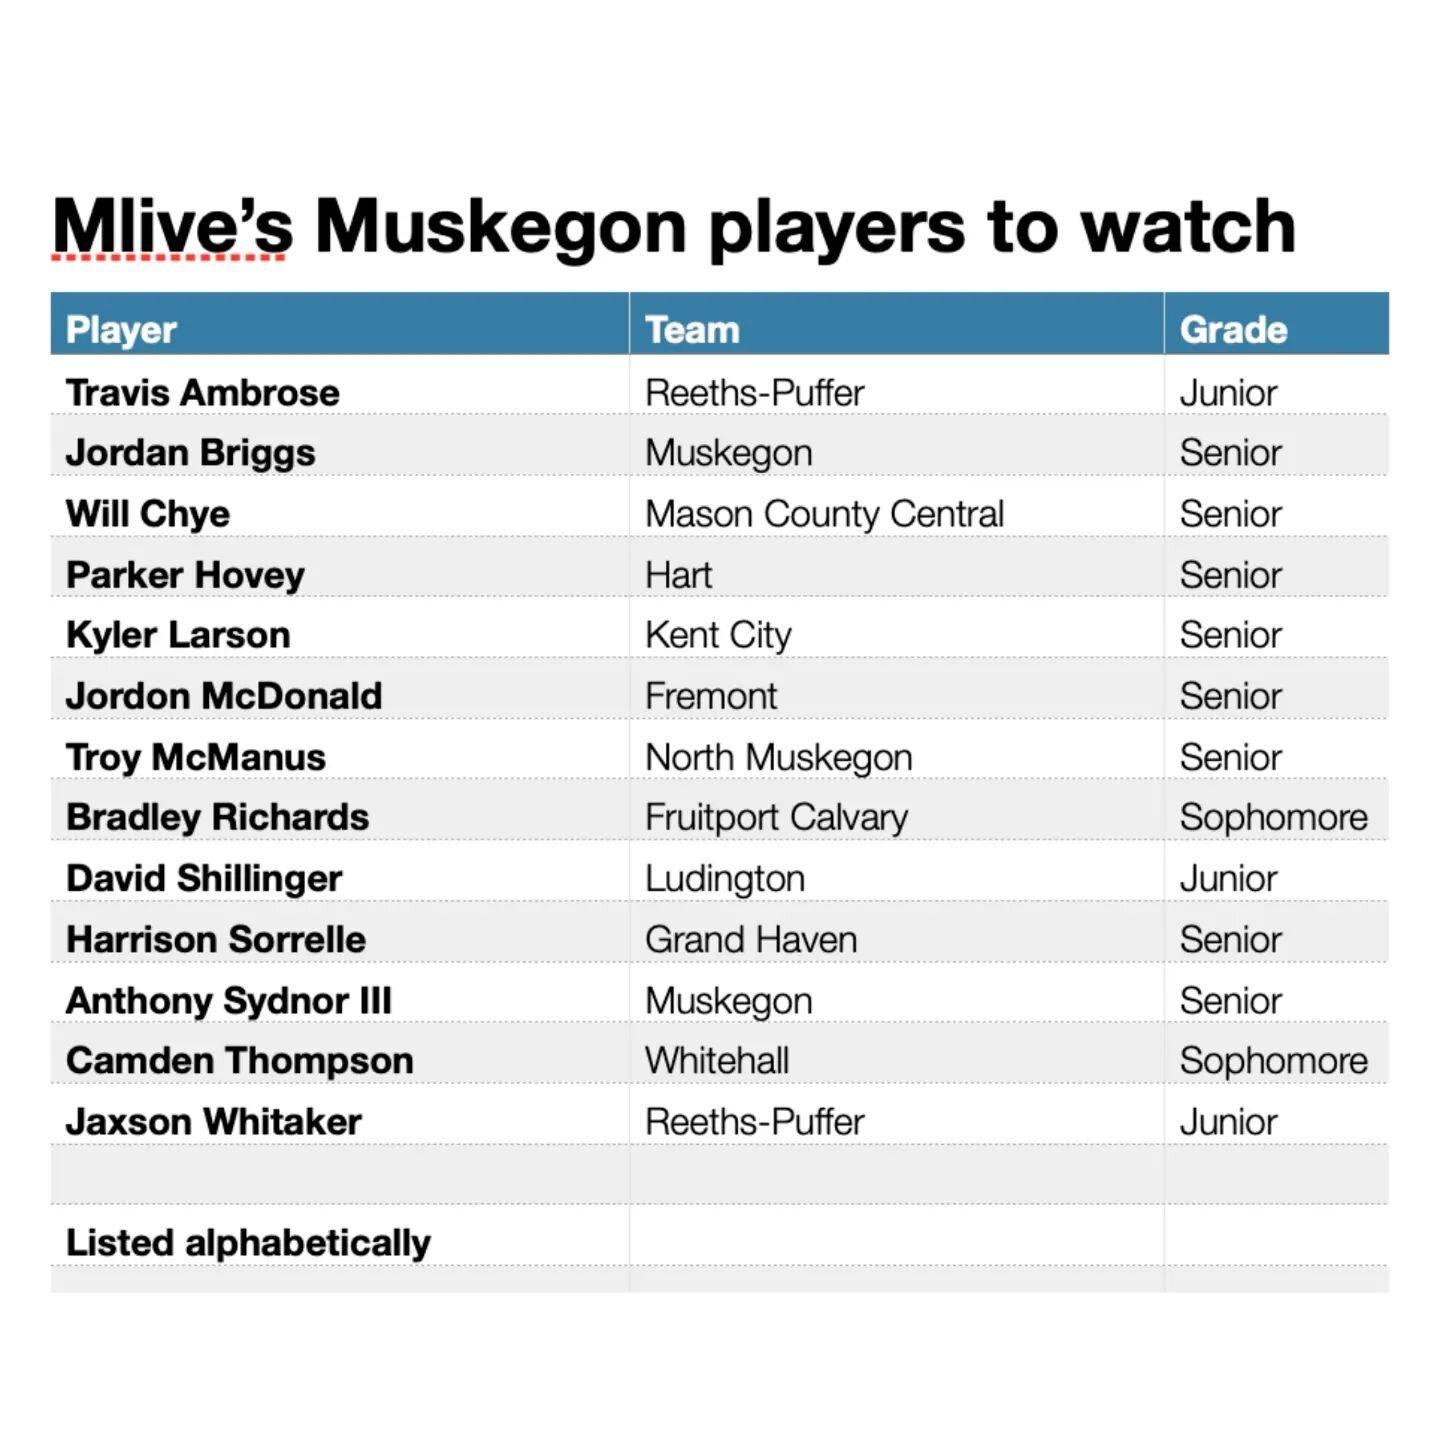 Mlive's players to watch from the Muskegon area.
Find the entire story on their website. 

This is purely informative since I don't rank Muskegon players.